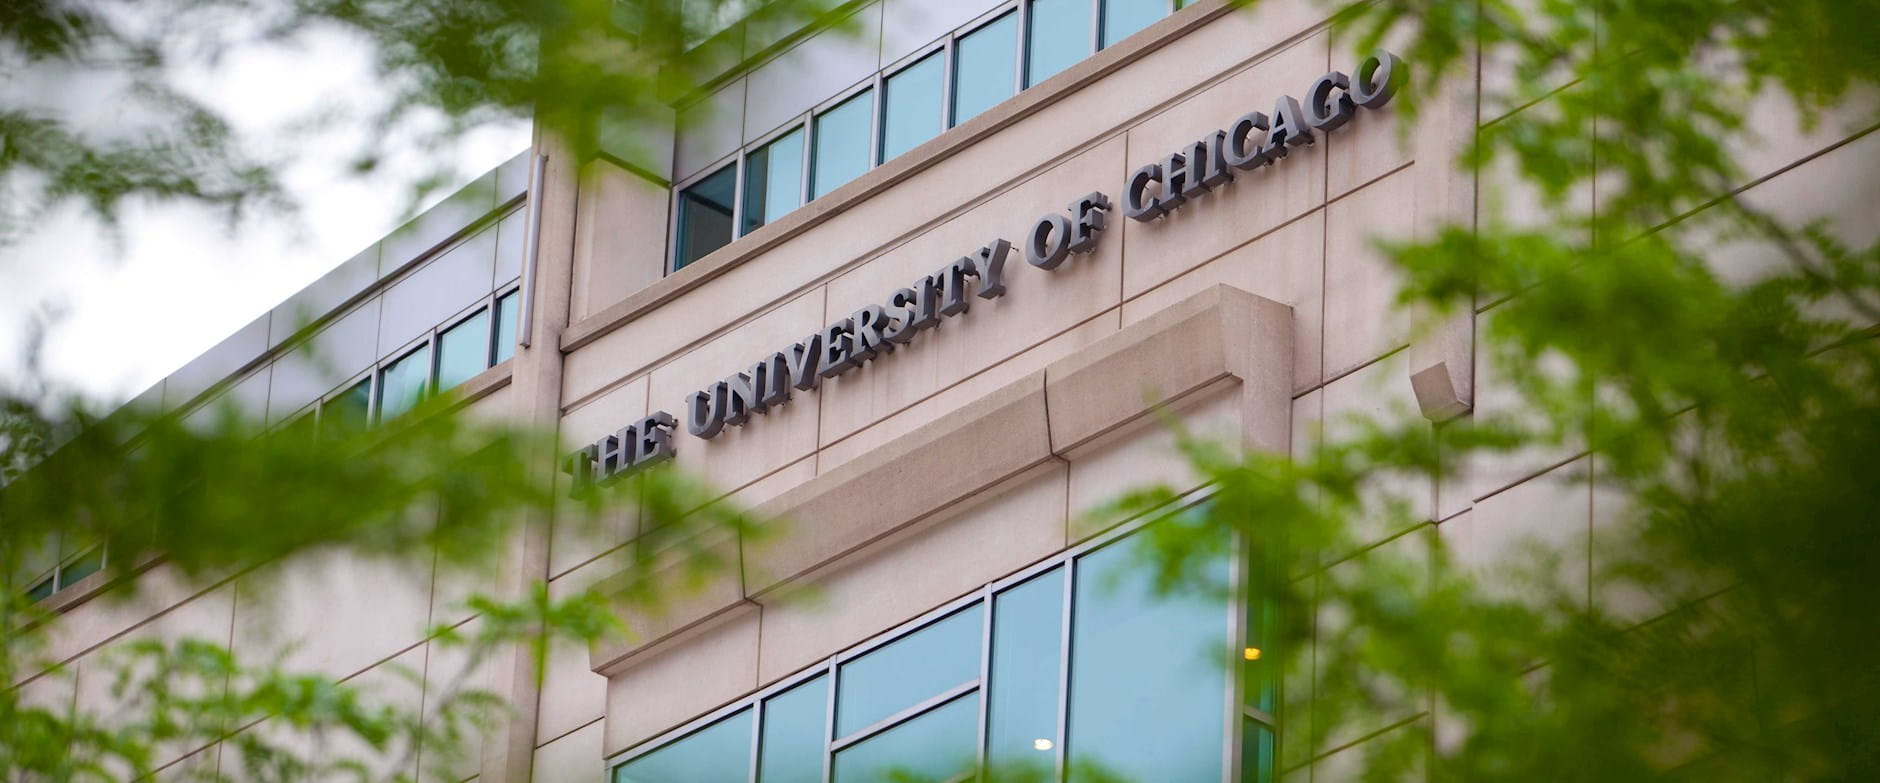 Top 10 MBA programs in the U.S. - 3. Booth - Univ. of Chicago (3